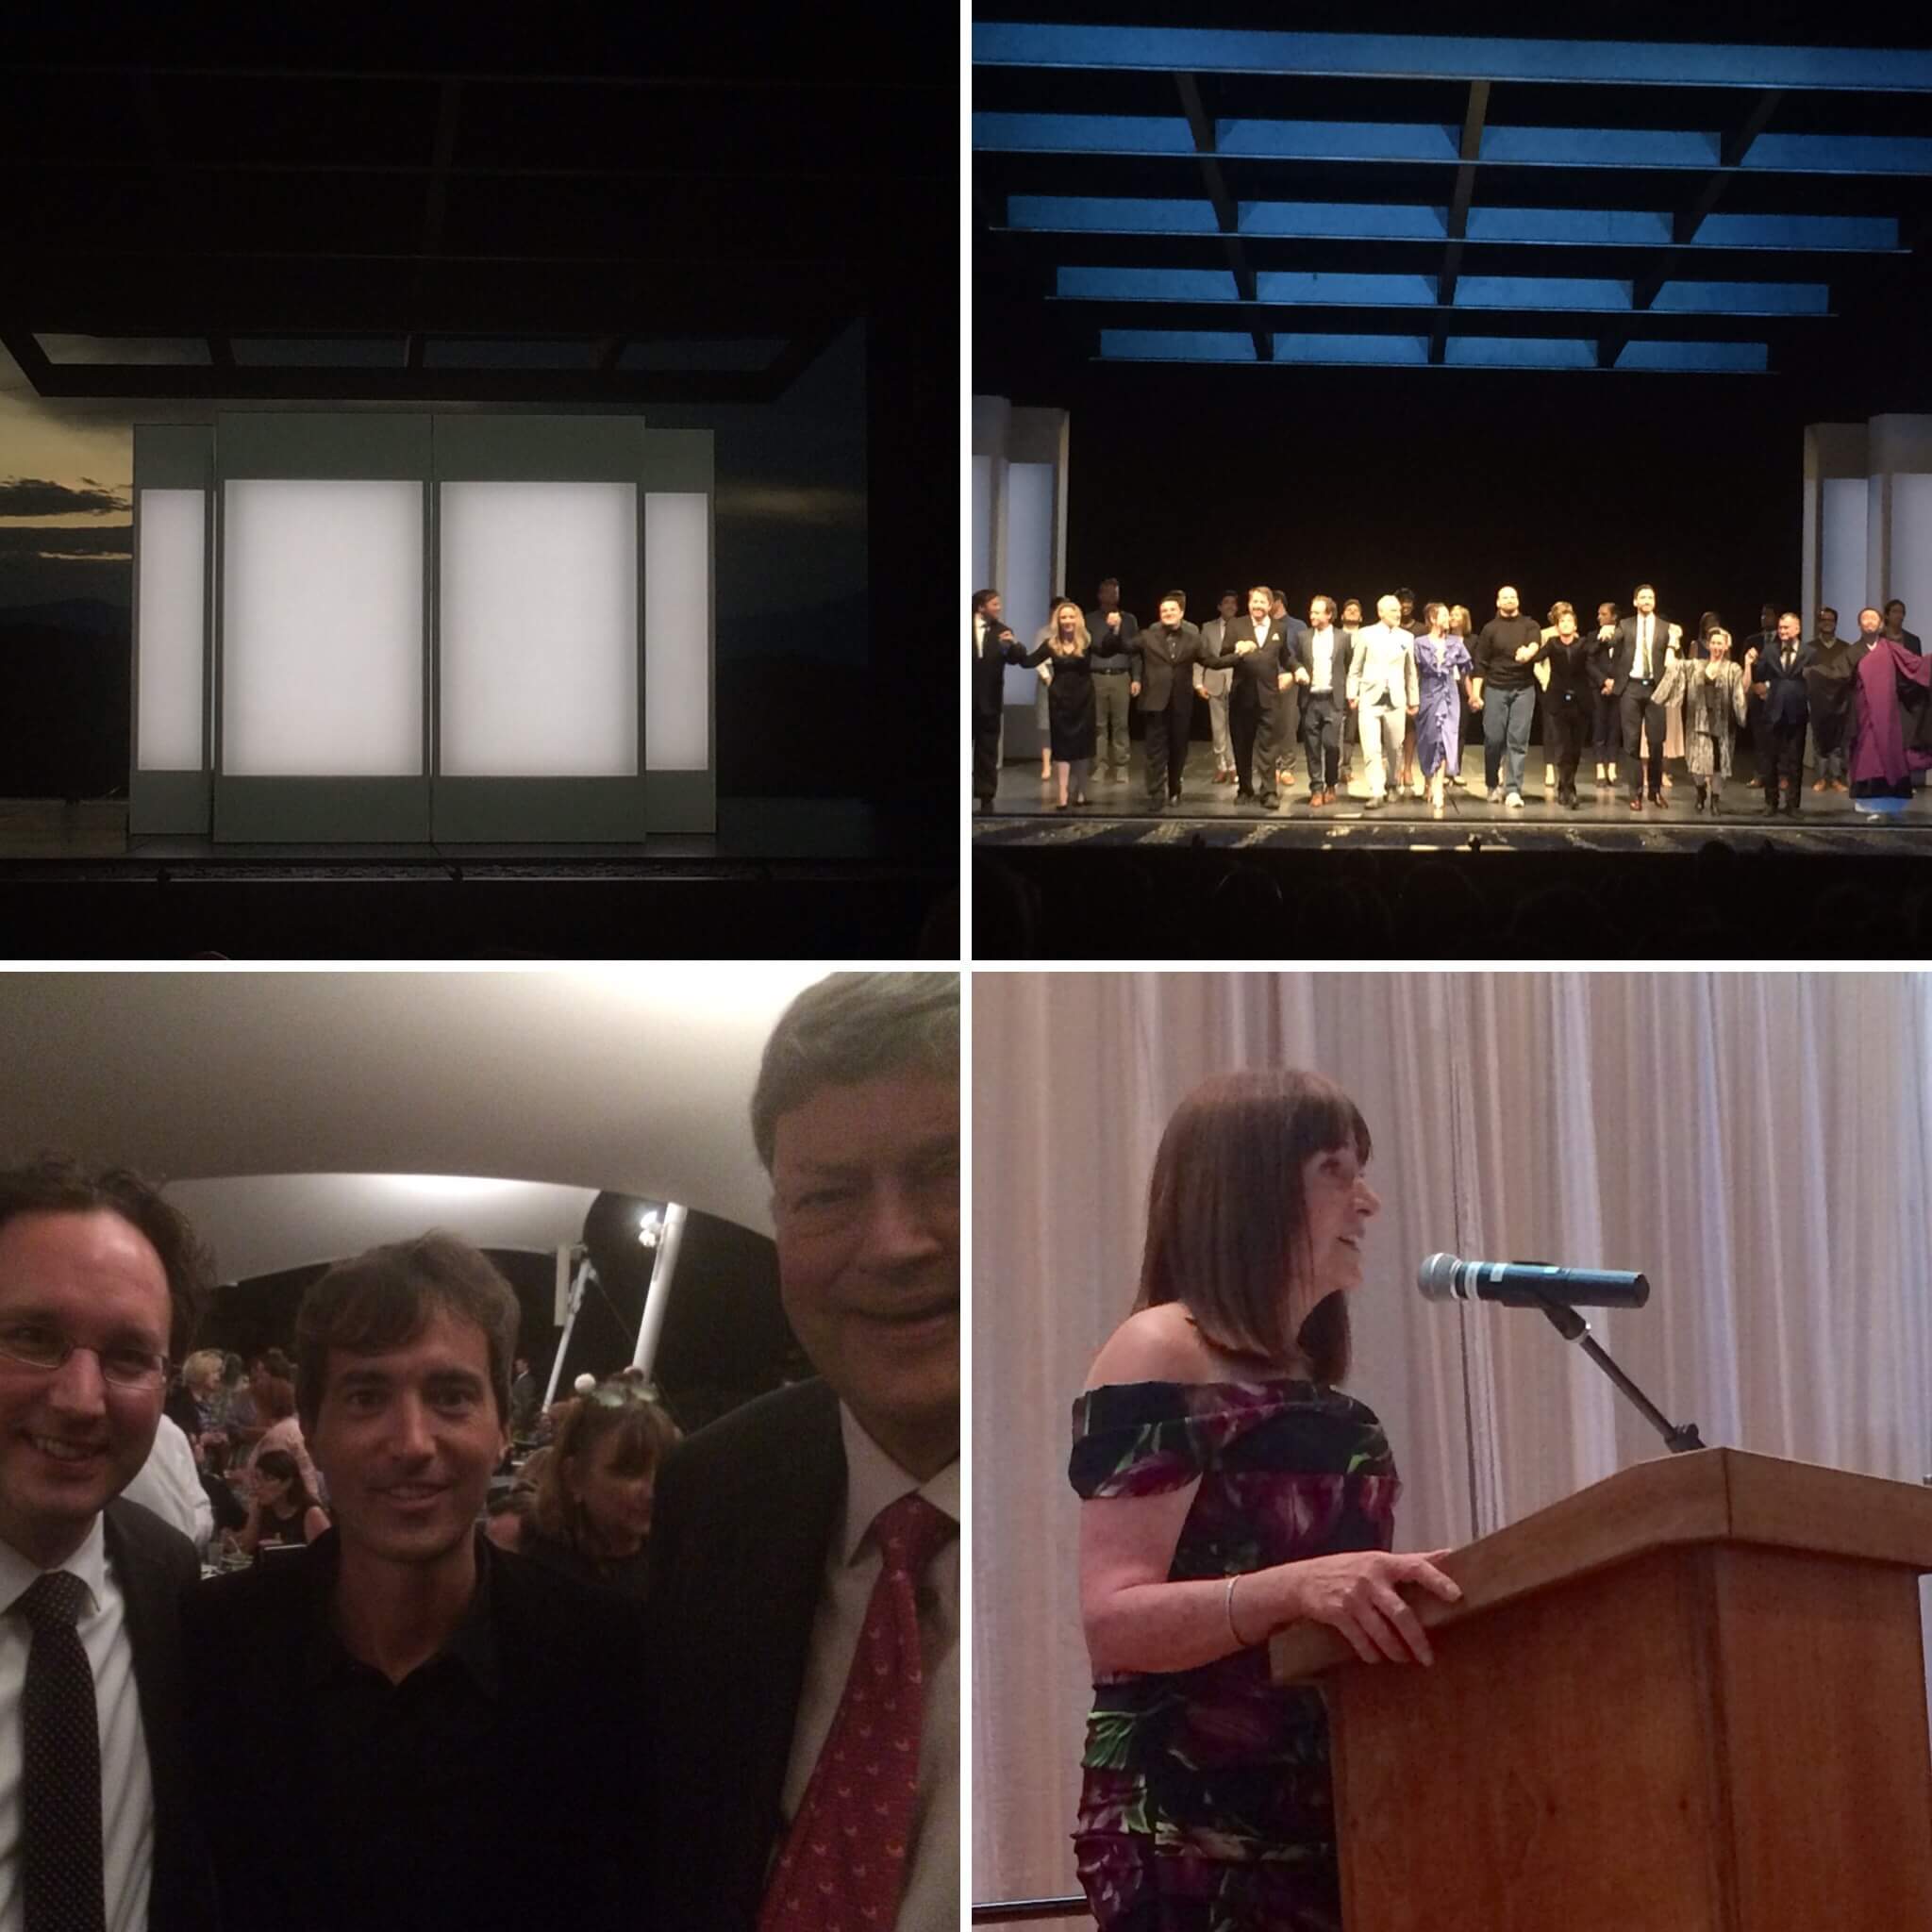 The opening of The (R)evolution of Steve Jobs at Santa Fe Opera. Clockwise from top left: the technologically savvy set; company bows; with Mason Bates and John Gunn; Santa Fe board president and great friend of SFO, Susan Marineau making remarks at the pre-show dinner.